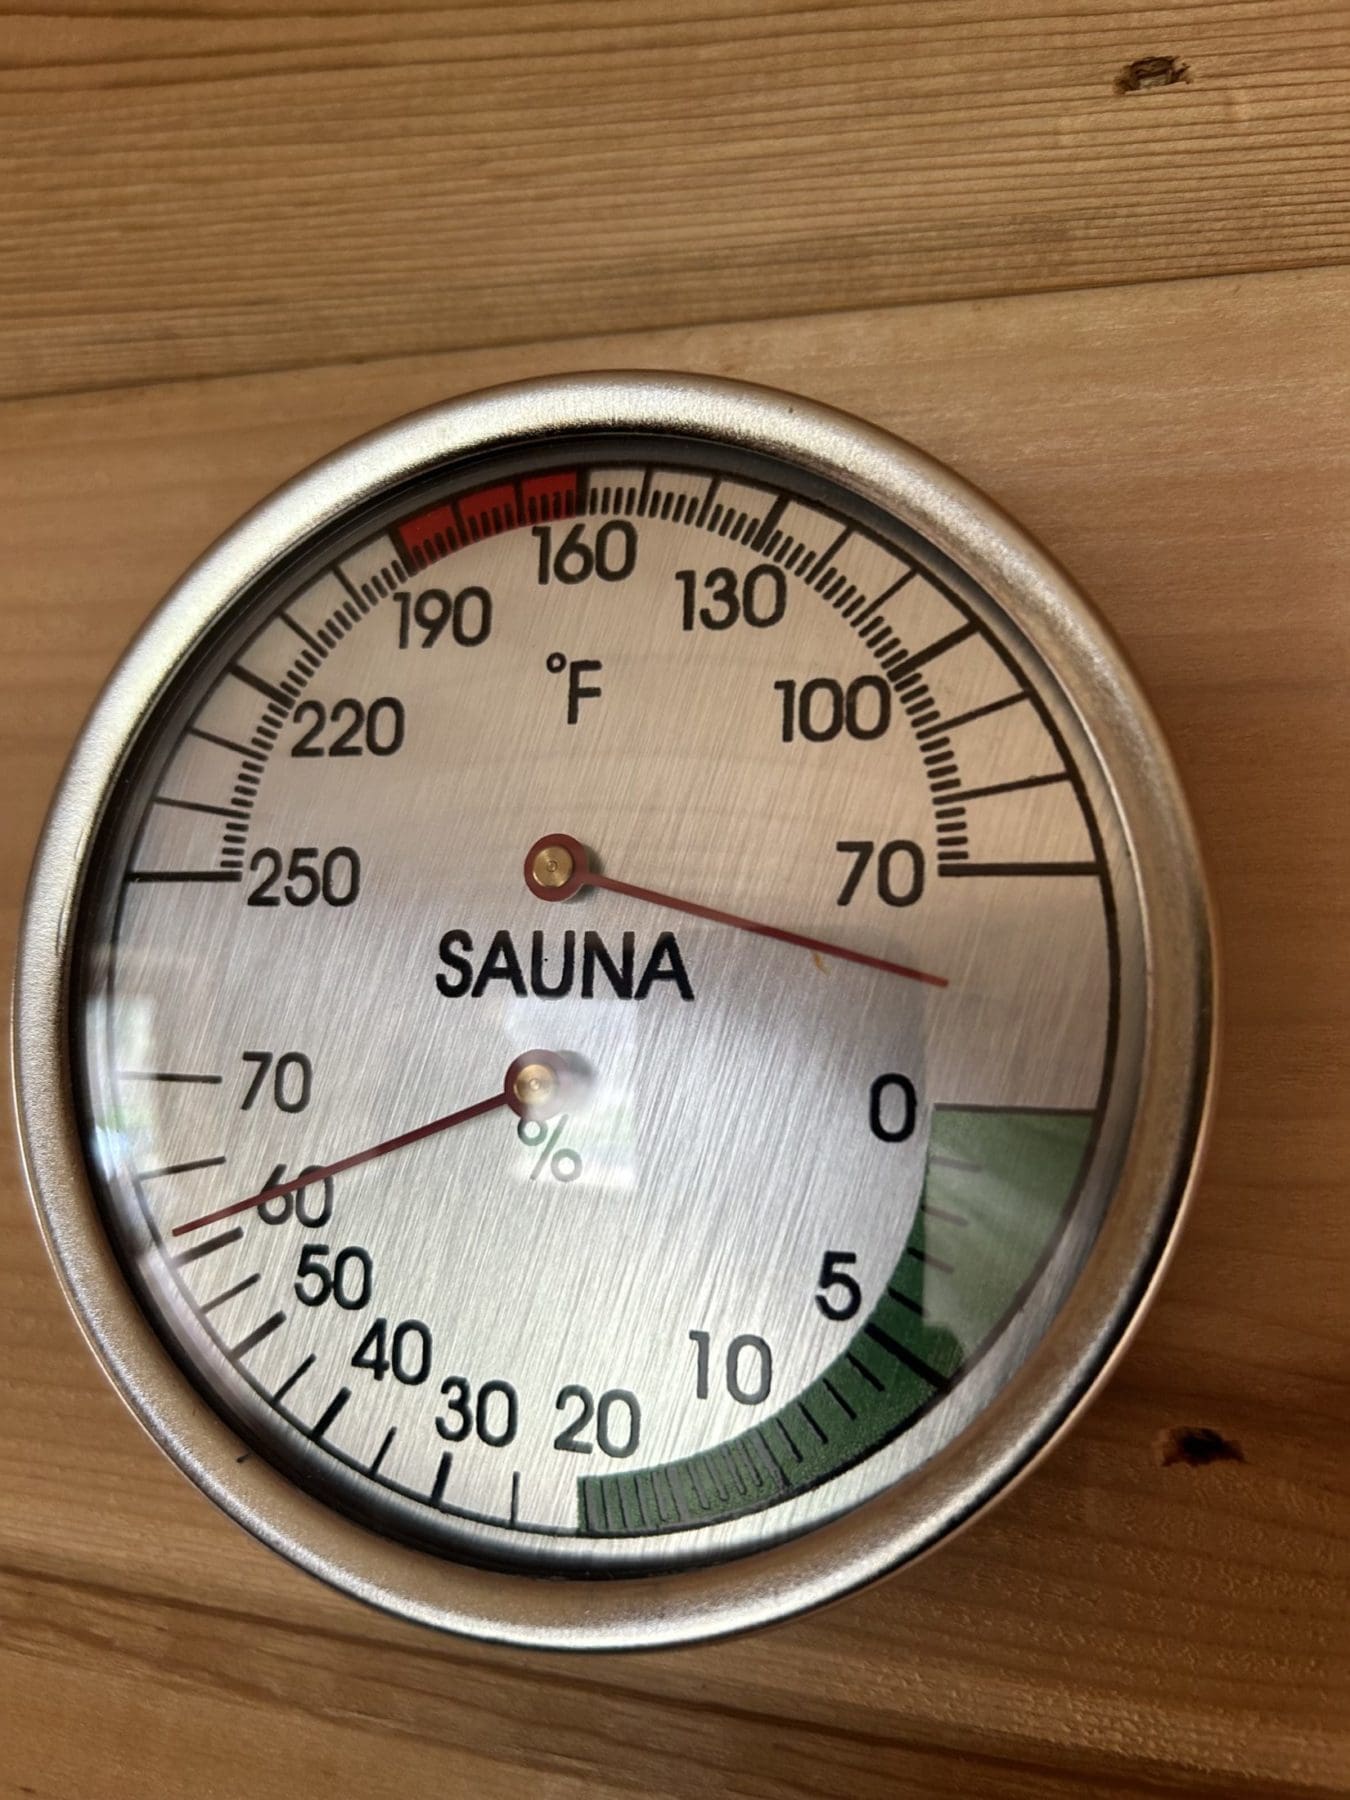 Wall Hanging Wooden Round Sauna Thermometer and Hygrometer